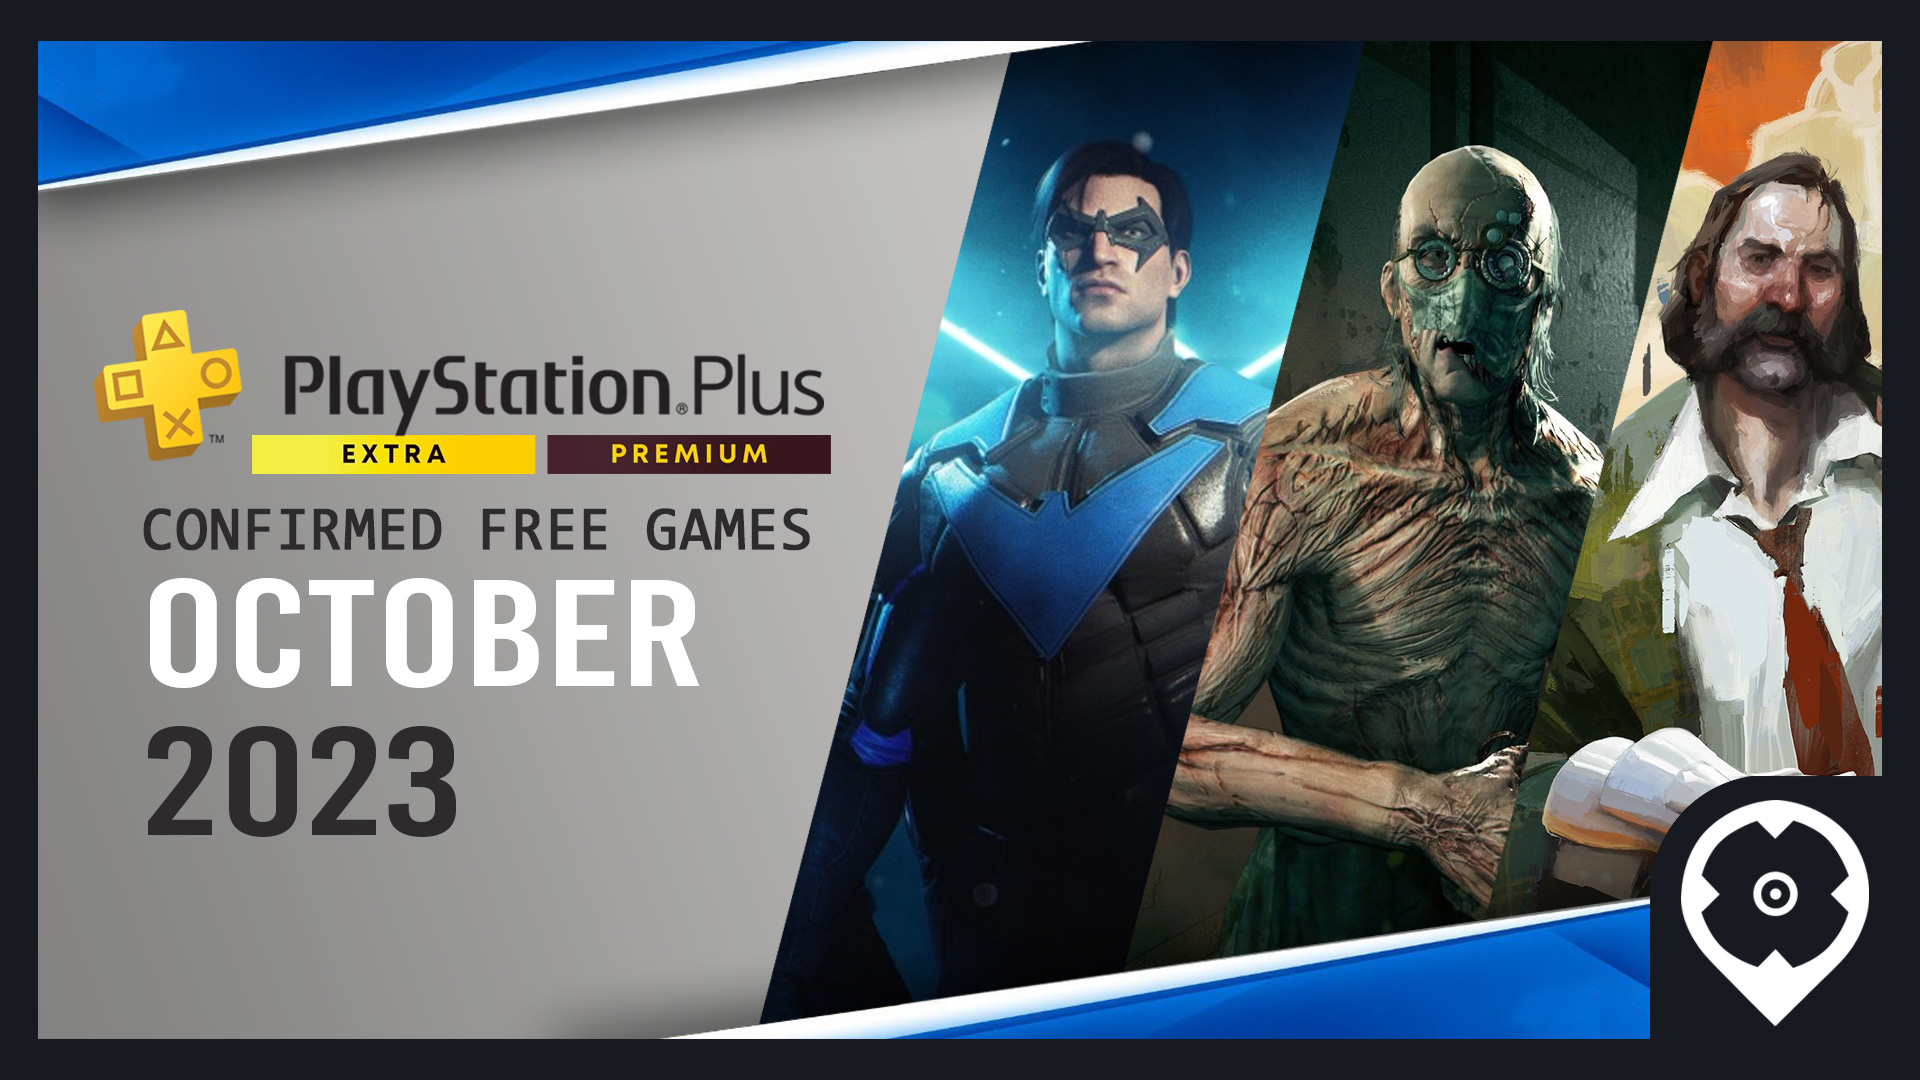 PlayStation Plus October games confirmed, cloud streaming launches for  Premium tier later this month